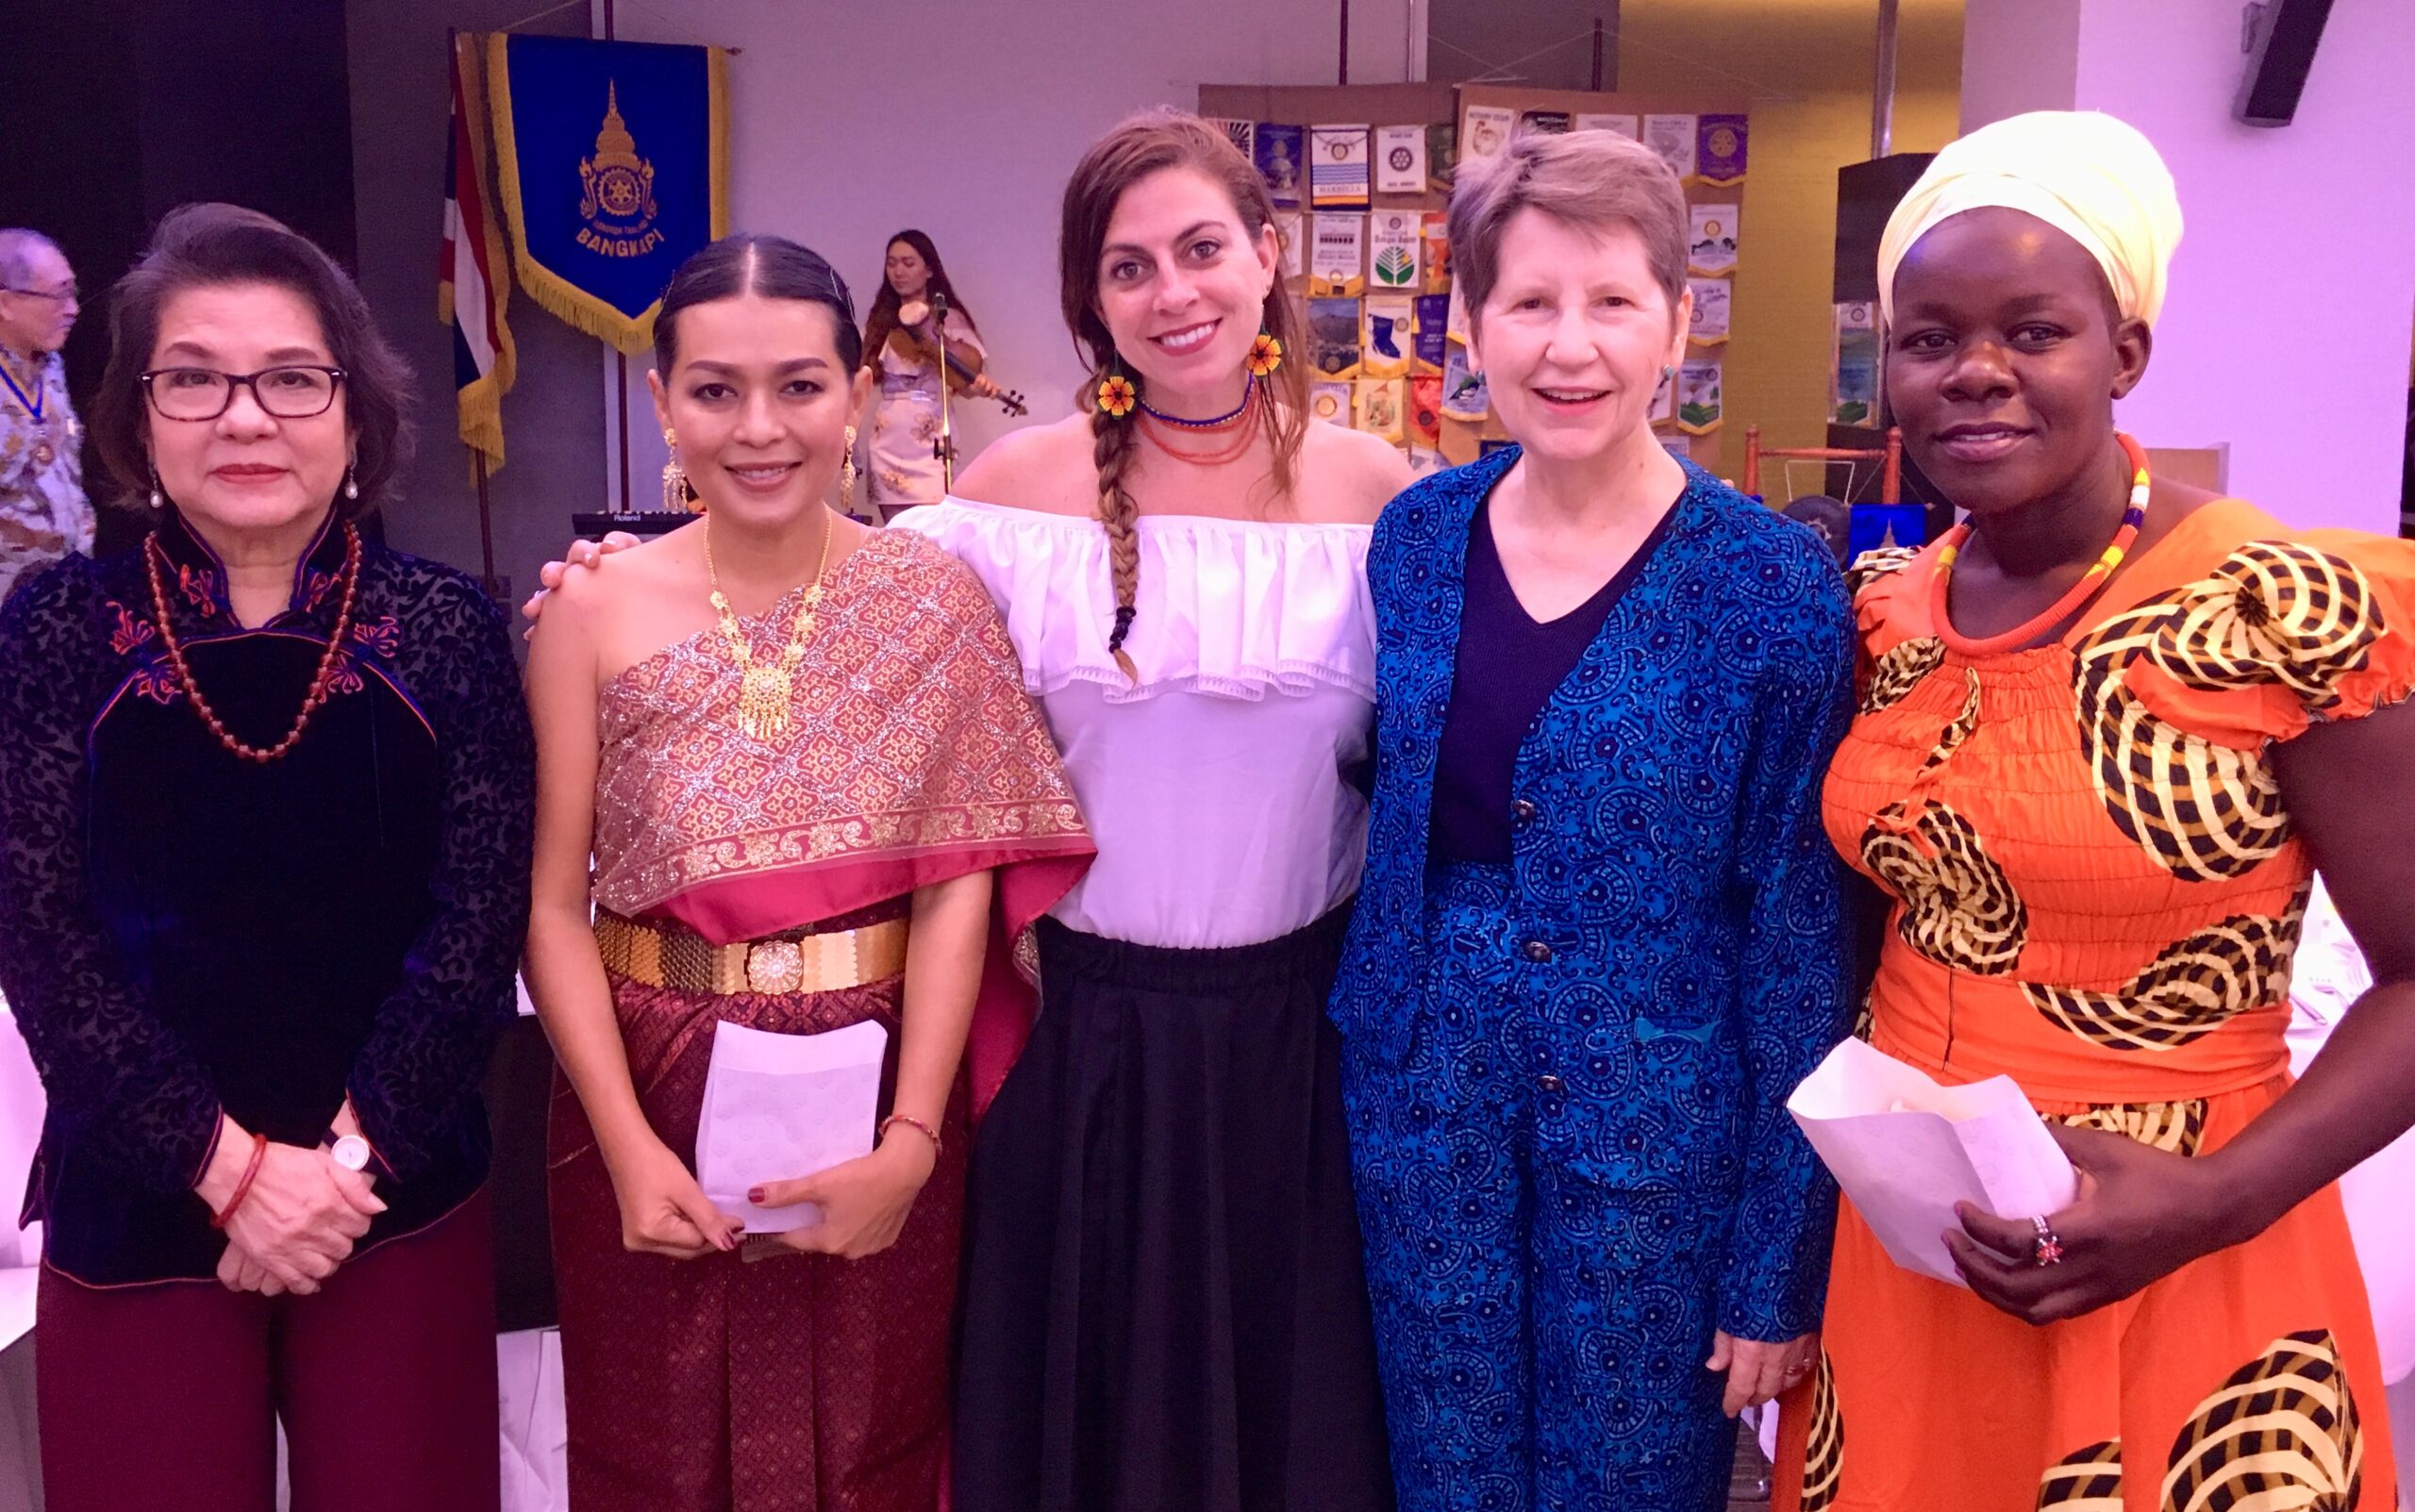 Rotary Peace Fellow María Antonia Pérez posing for a group photo with four other women at cultural night for the Rotary Peace Fellows and other members of the Rotary program.